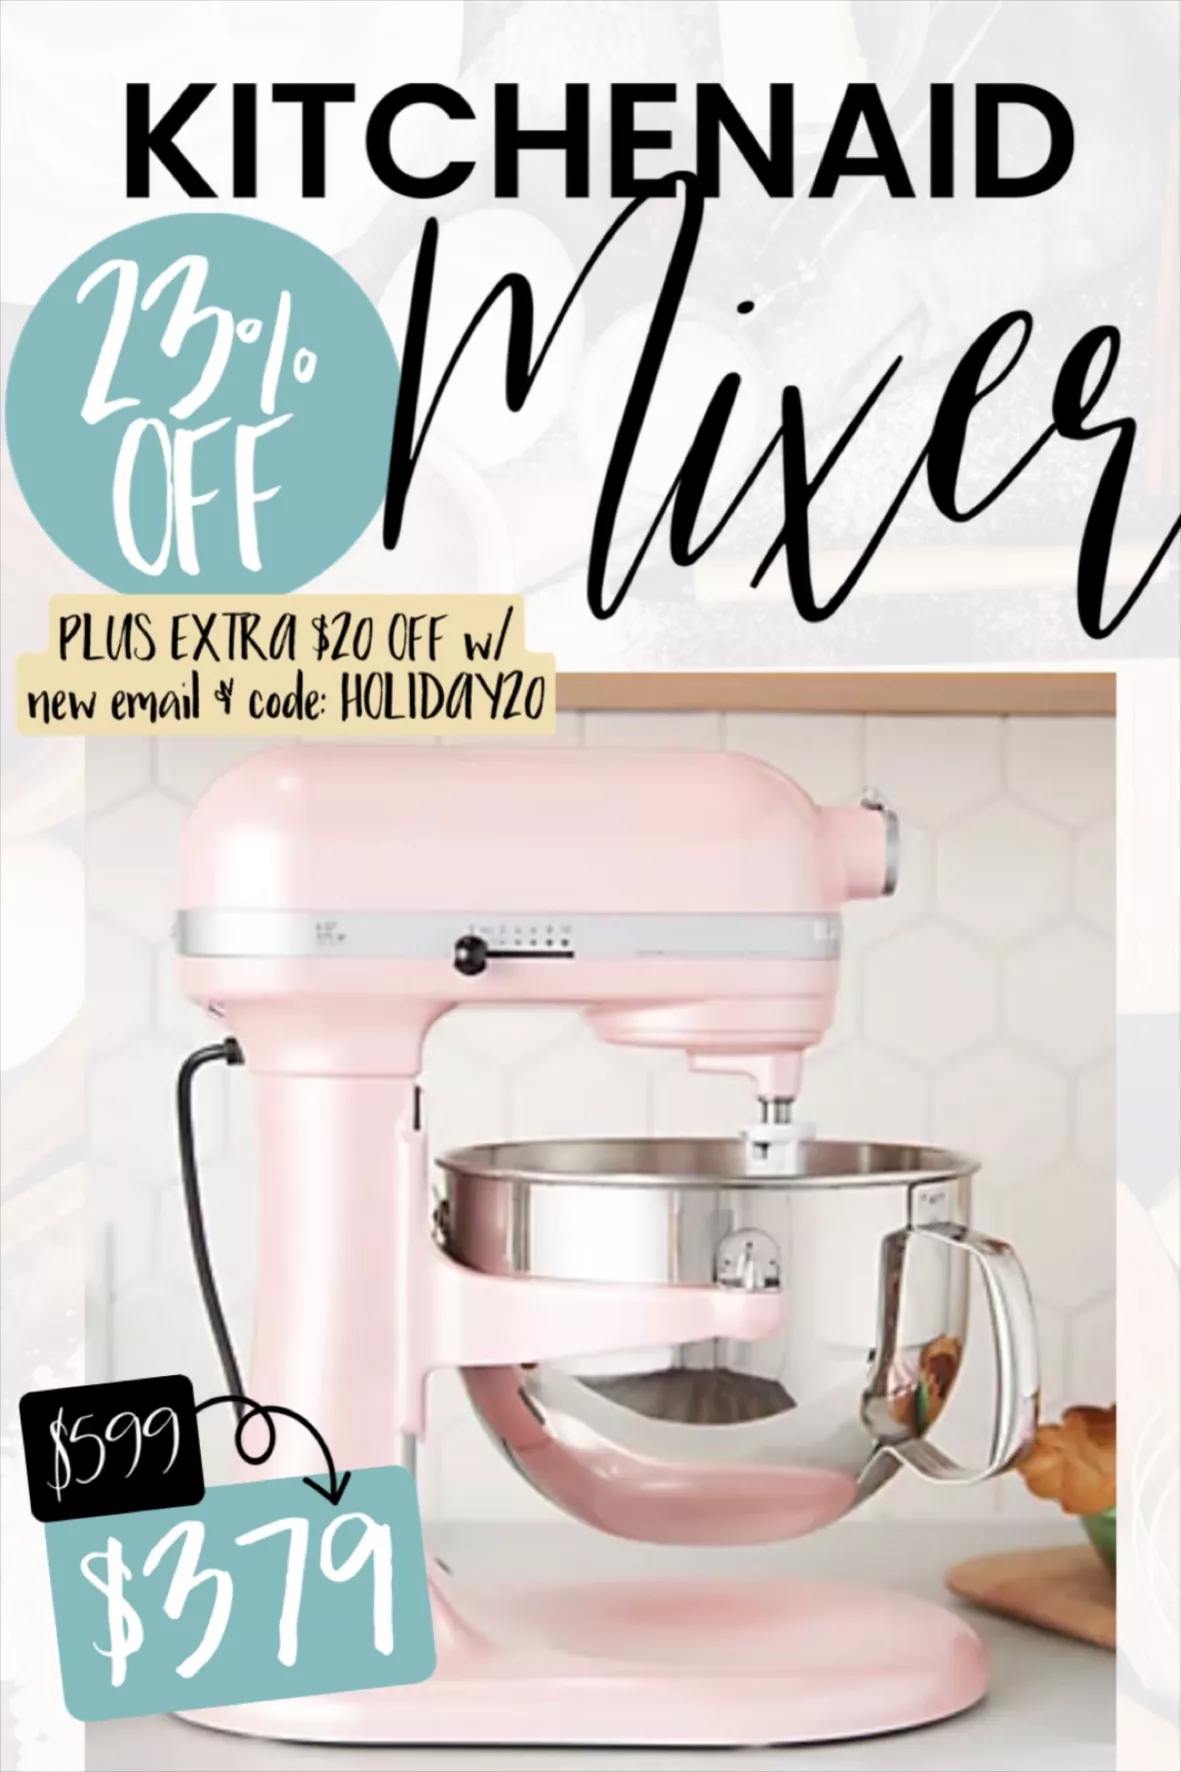 QVC deal: Get 15% off the KitchenAid Pro 600 Lift Stand Mixer